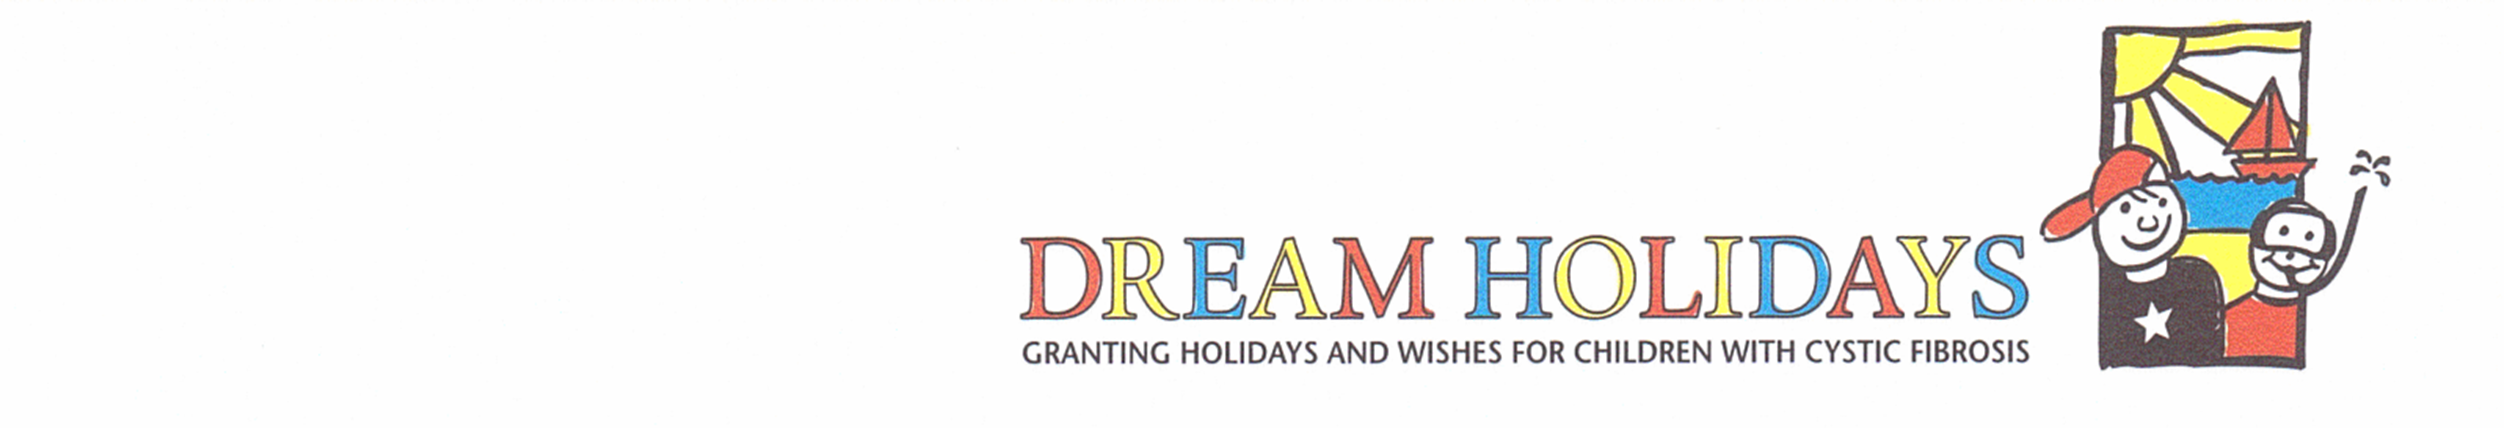 logo for Children with Cystic Fibrosis Dream Holidays